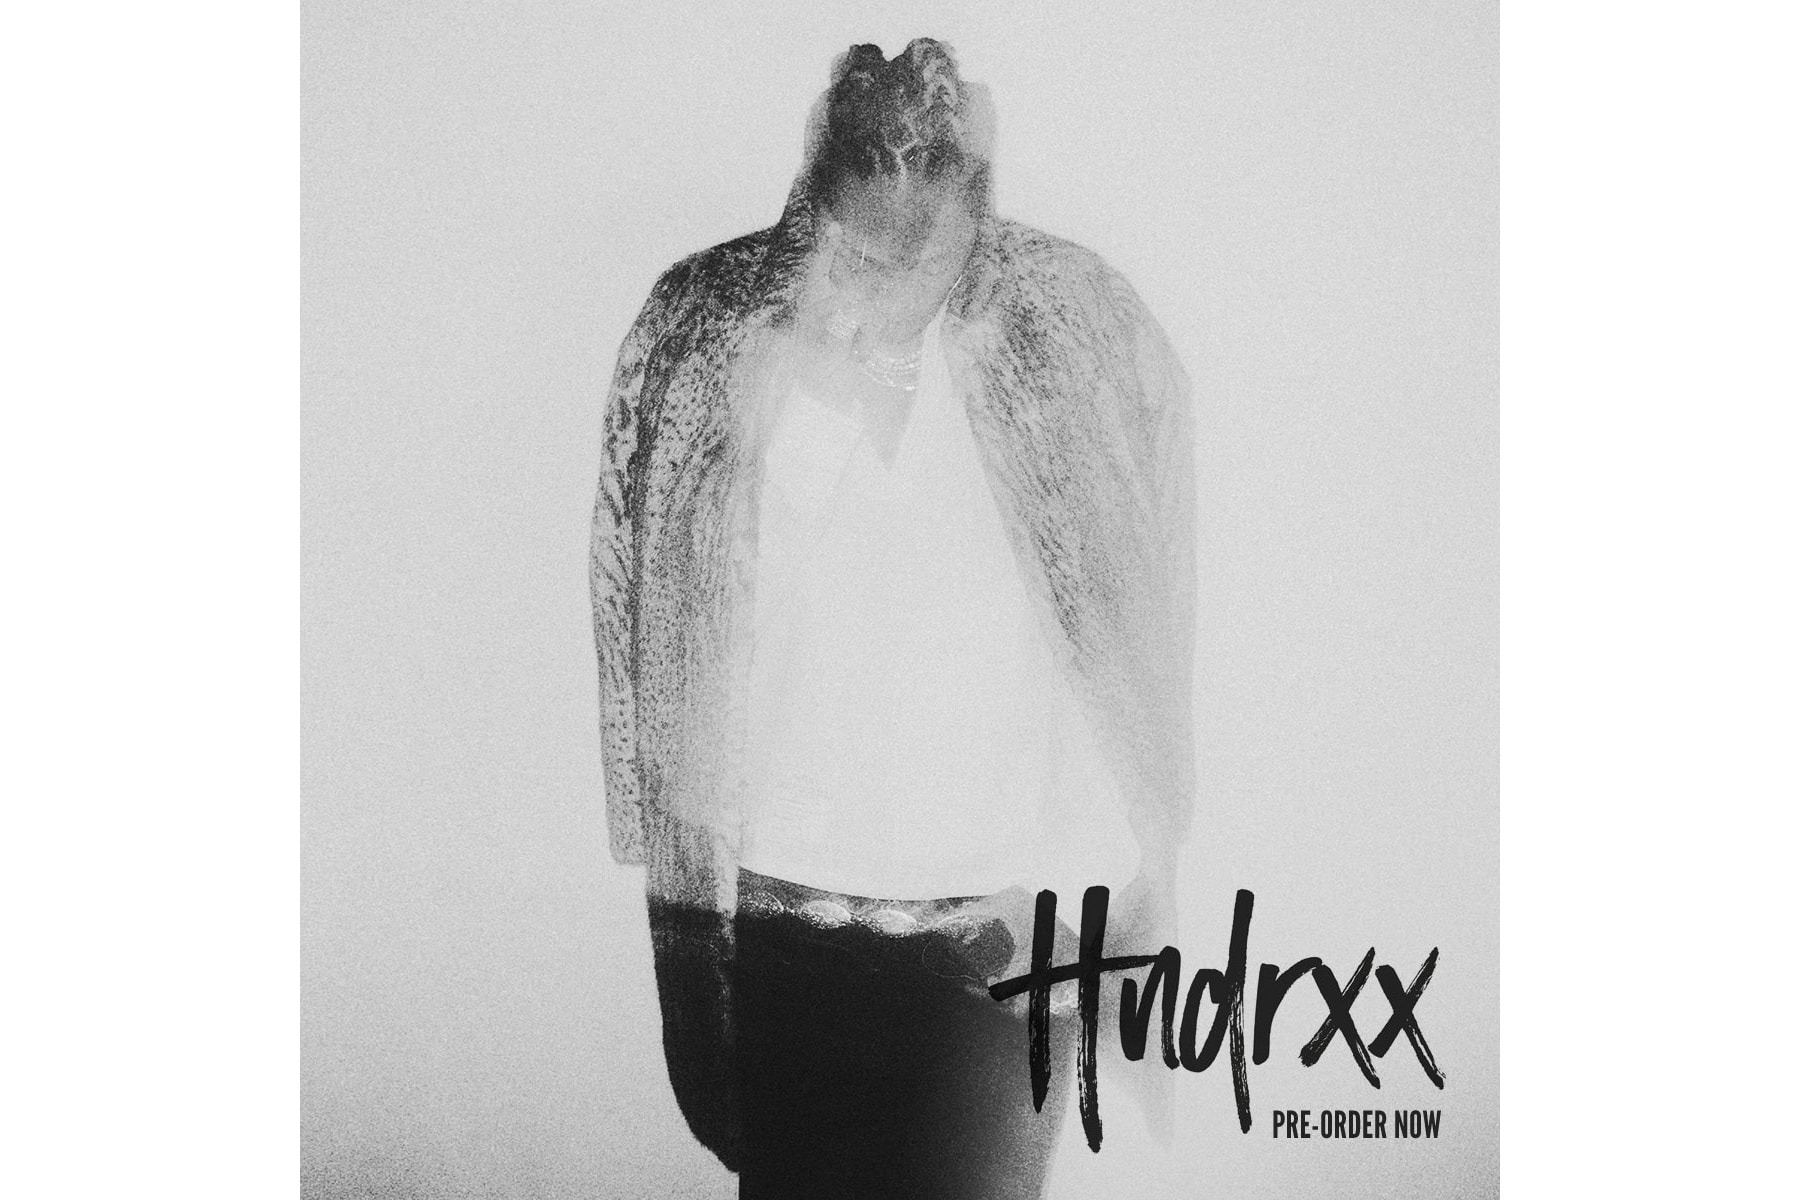 Future’s new album HNDRXX is coming Friday